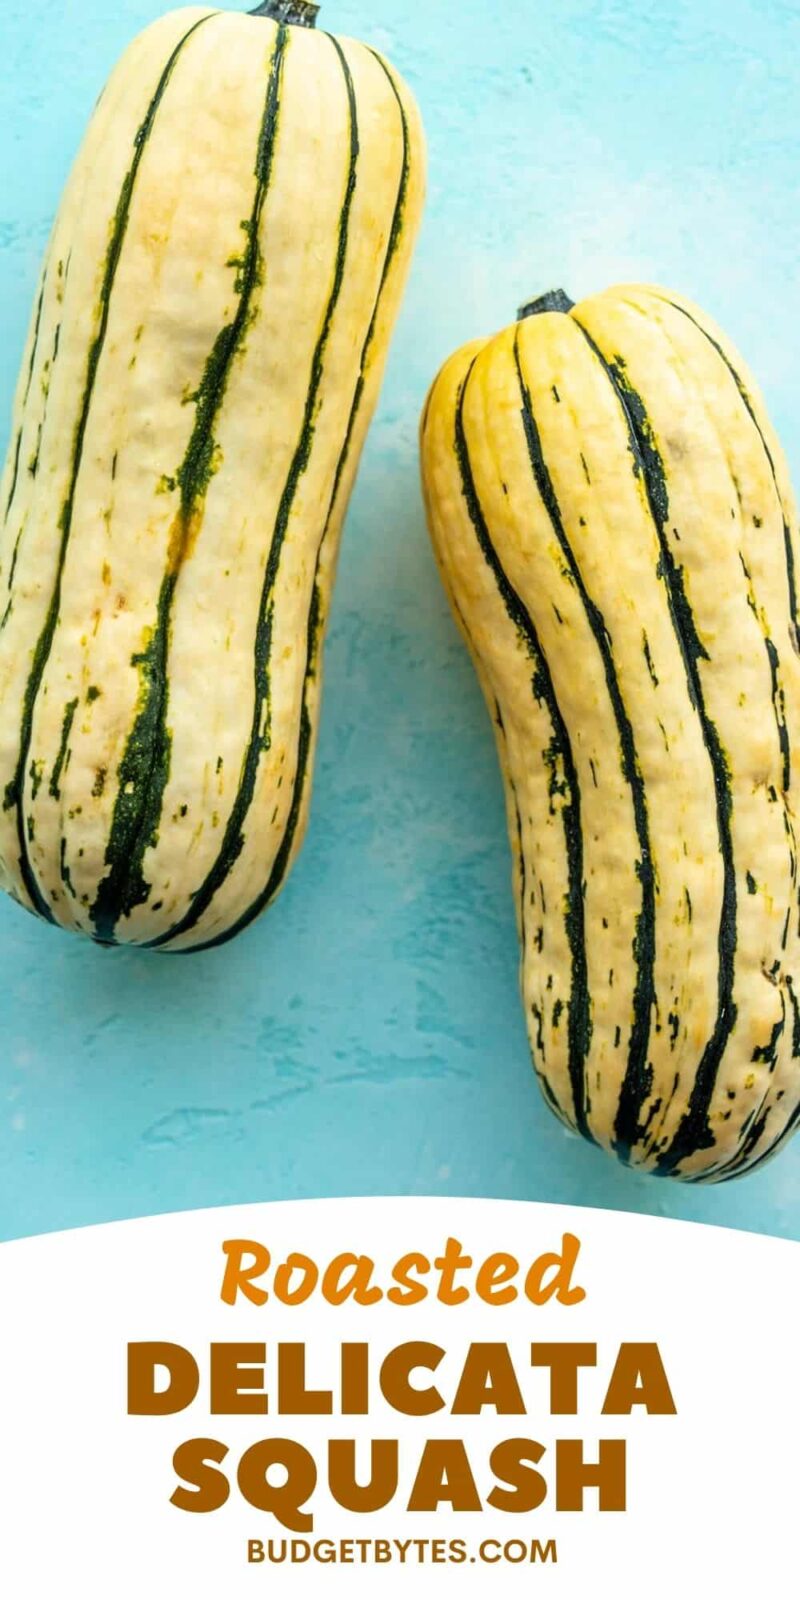 two whole delicata squashes on a blue background